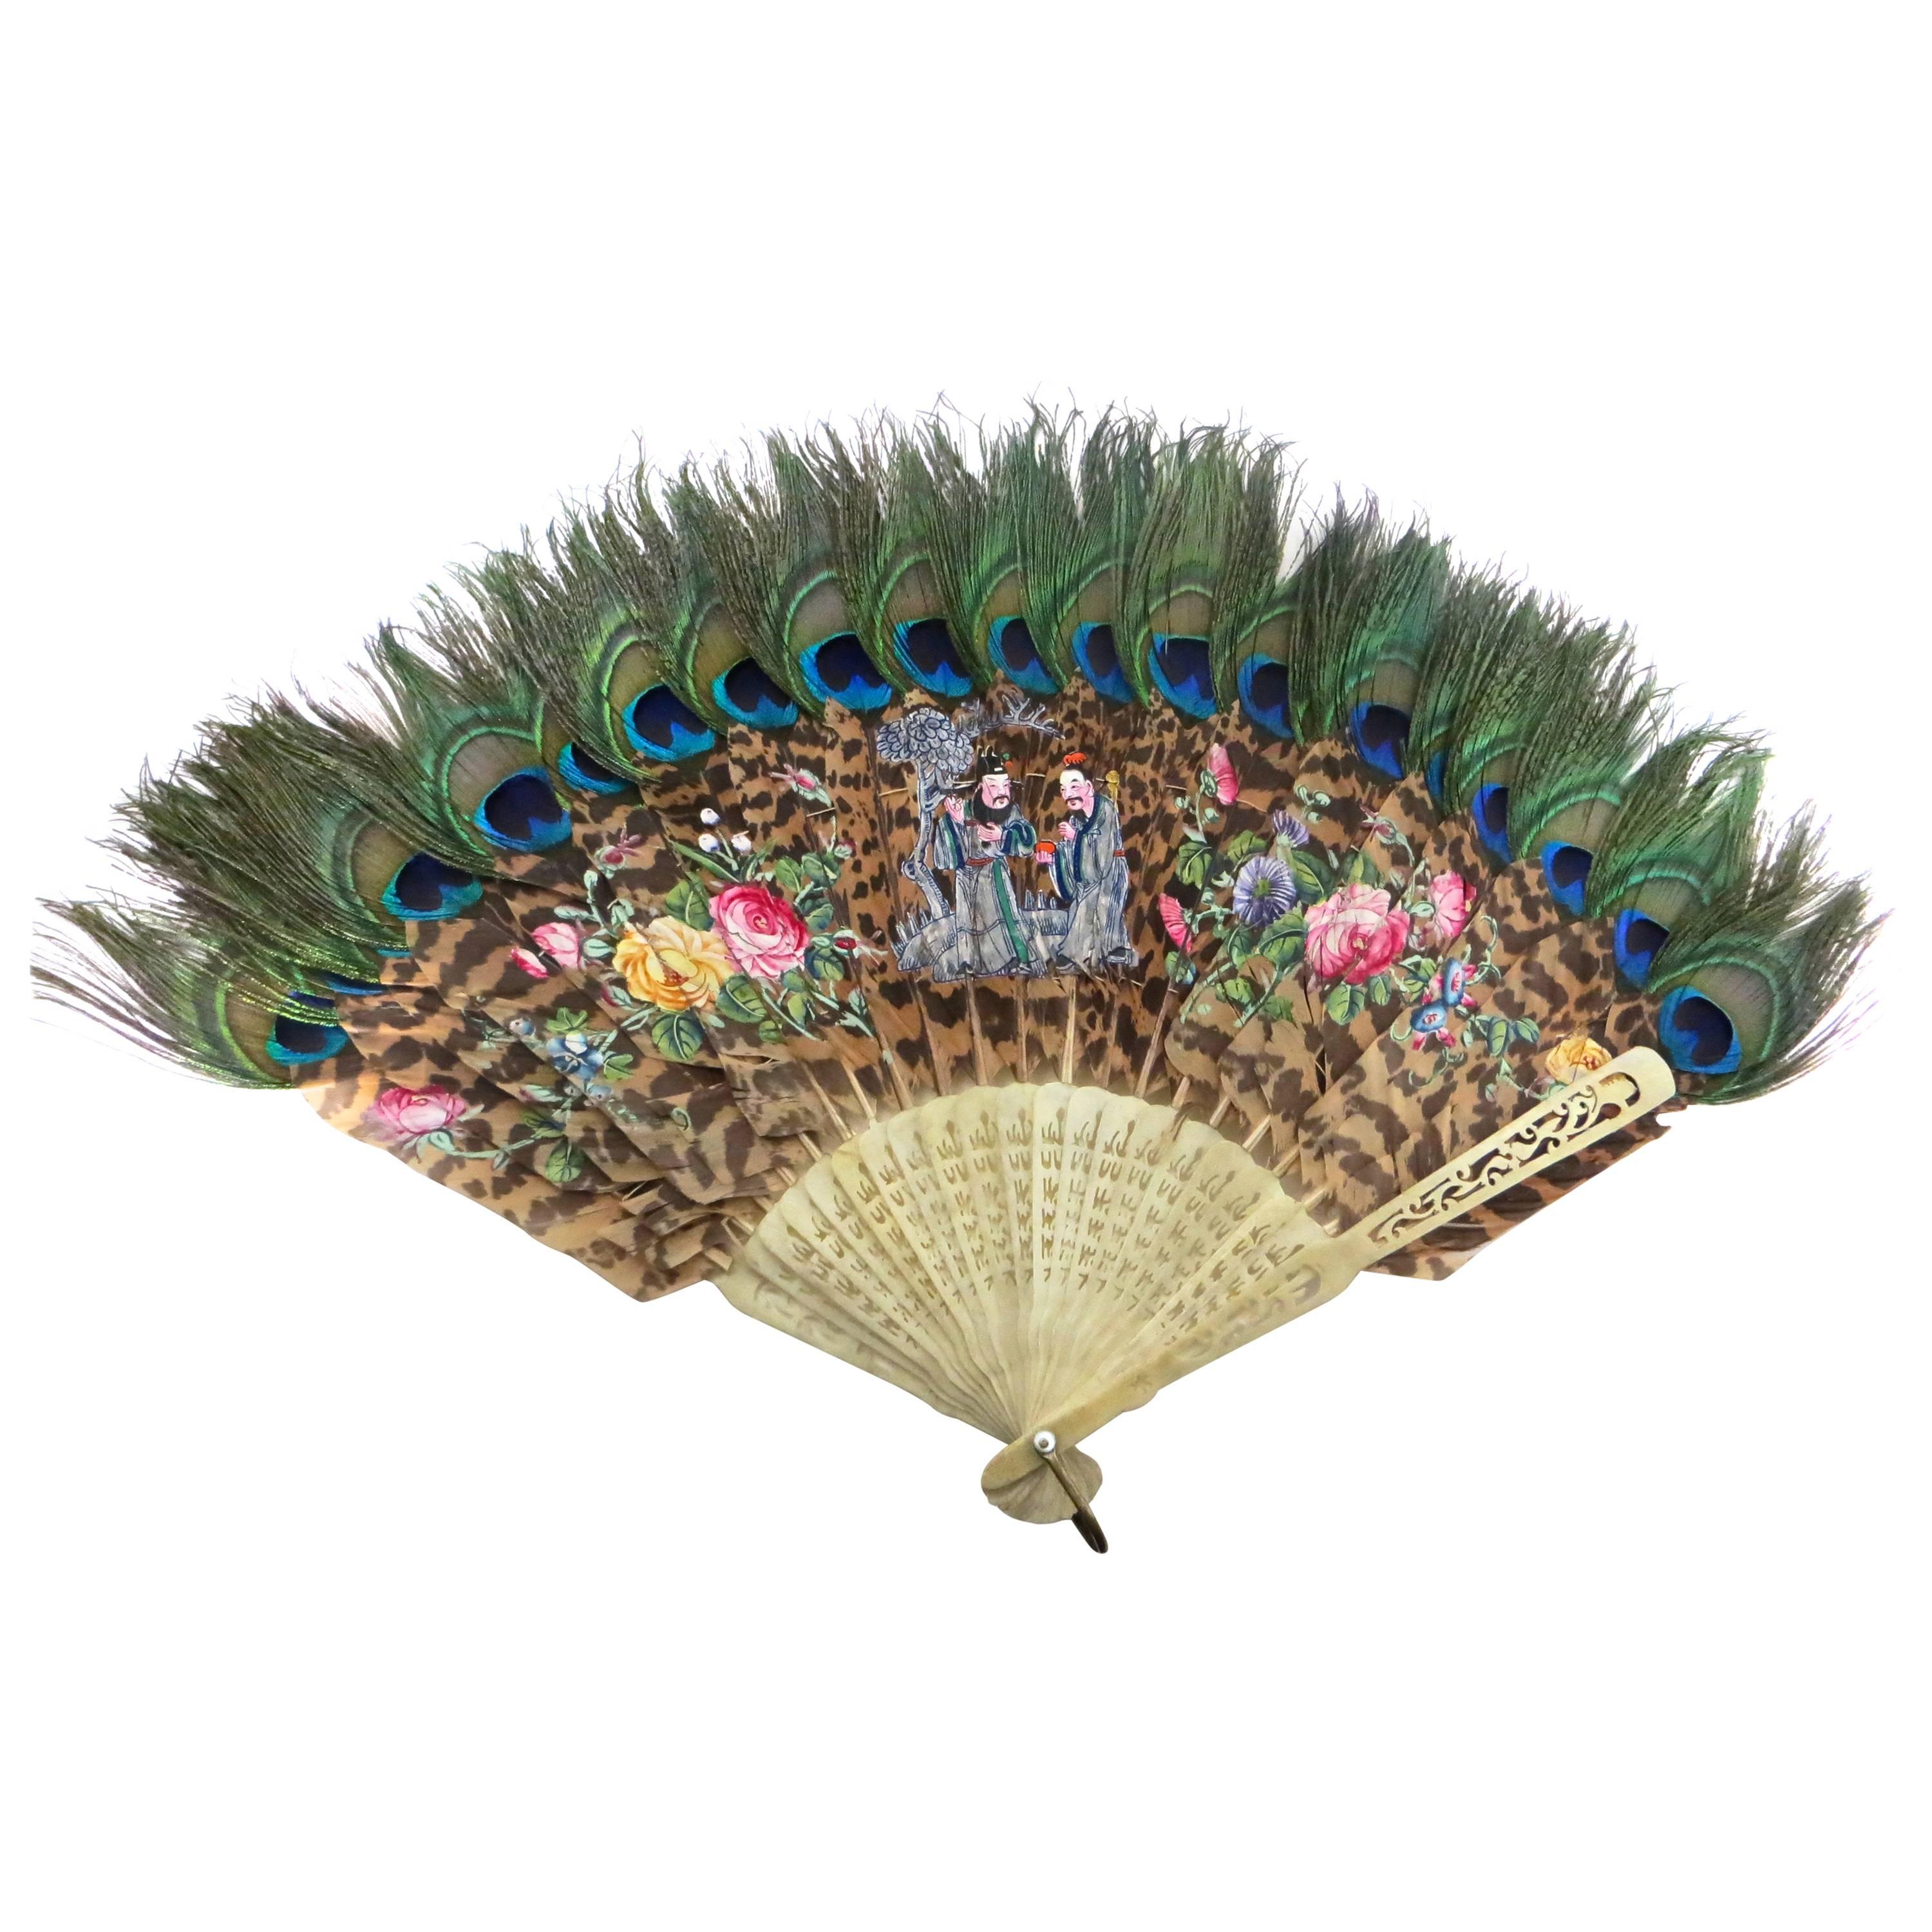 Hand Held Fan of Peacock Feathers, Japan, circa 1880s